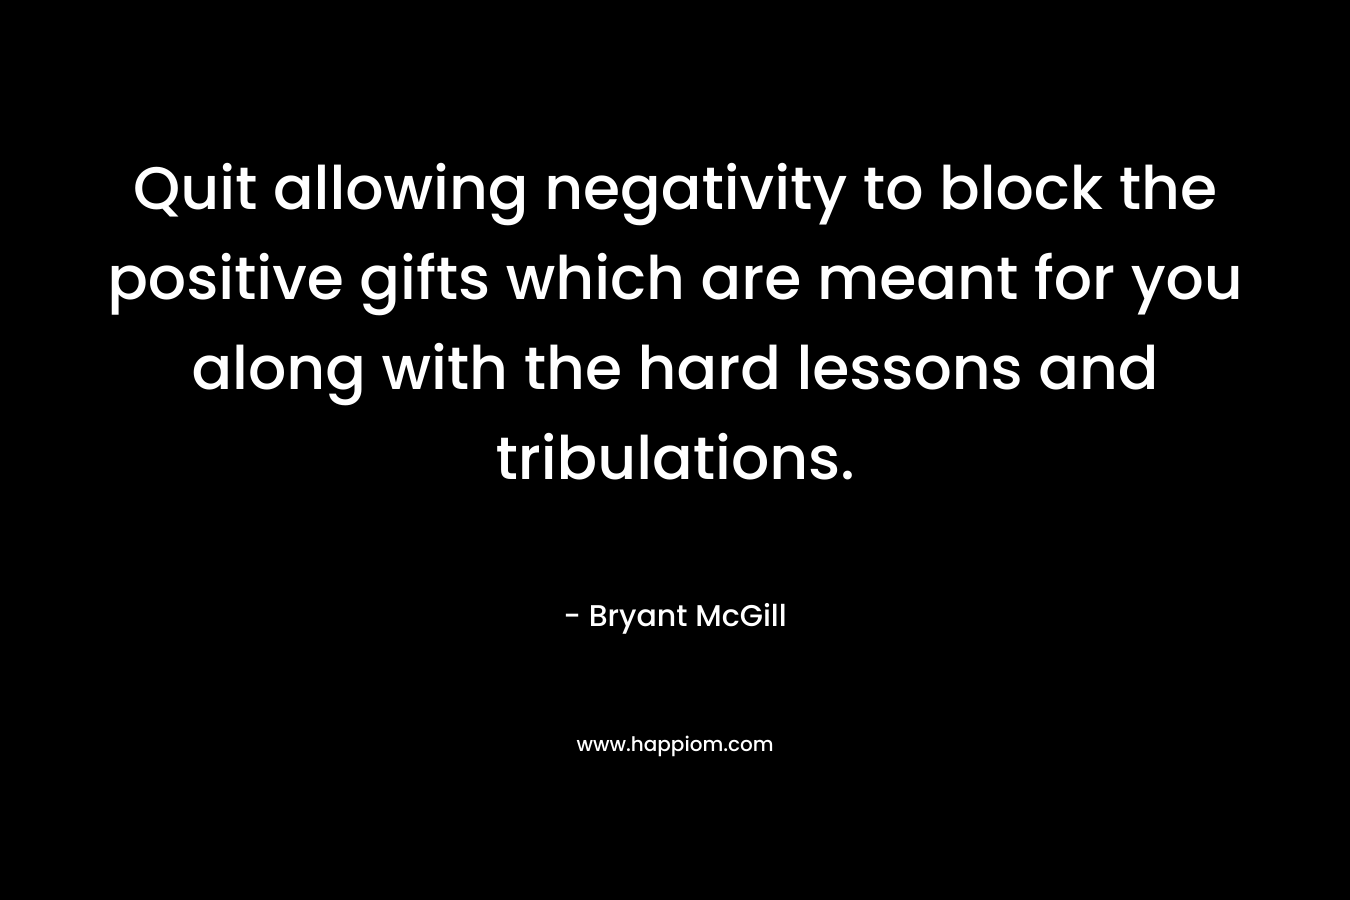 Quit allowing negativity to block the positive gifts which are meant for you along with the hard lessons and tribulations.